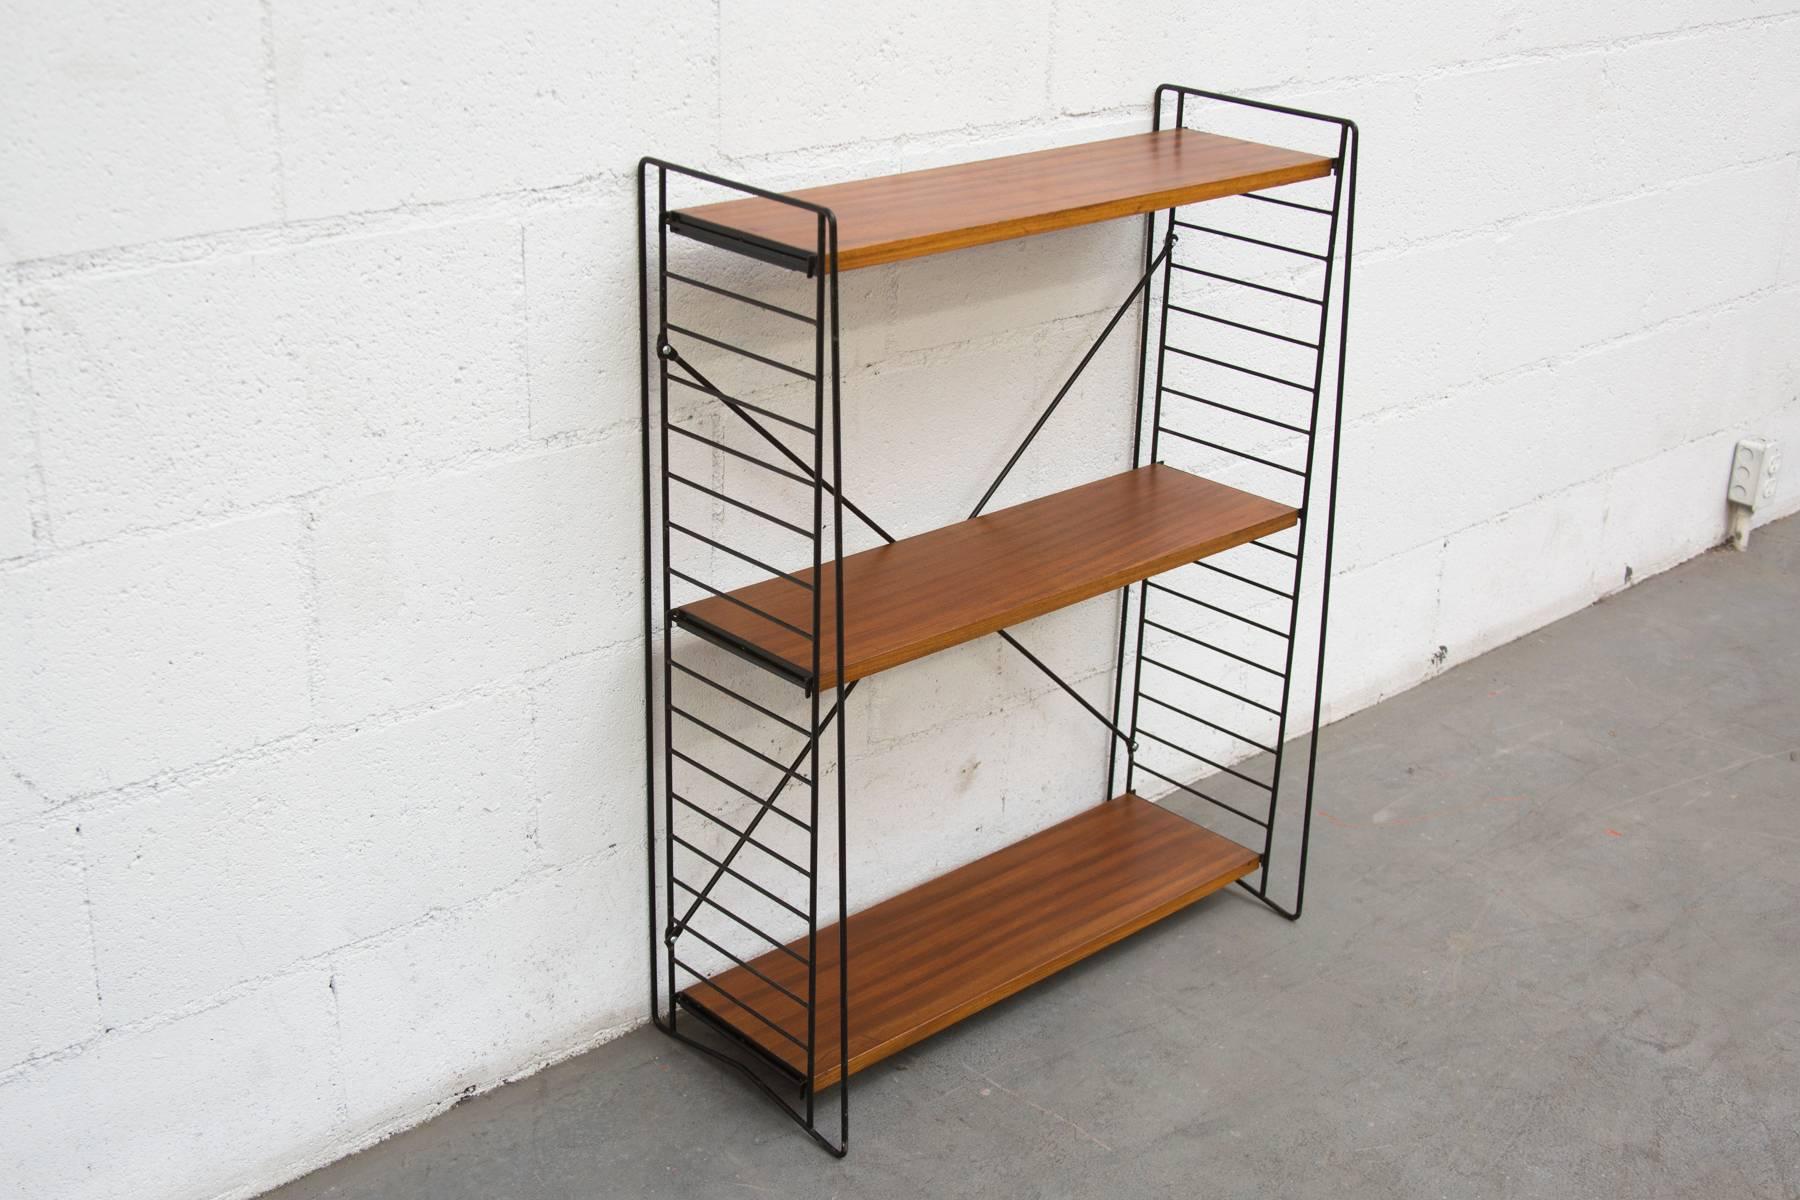 Smart and sleek standing teak and metal bookshelf unit for Tomado by Jan Van Der Togt. Shelves are movable. These units can be flat packed for shipping. Original condition, with some wear. Also Available with multicolored Enameled Metal Shelves,